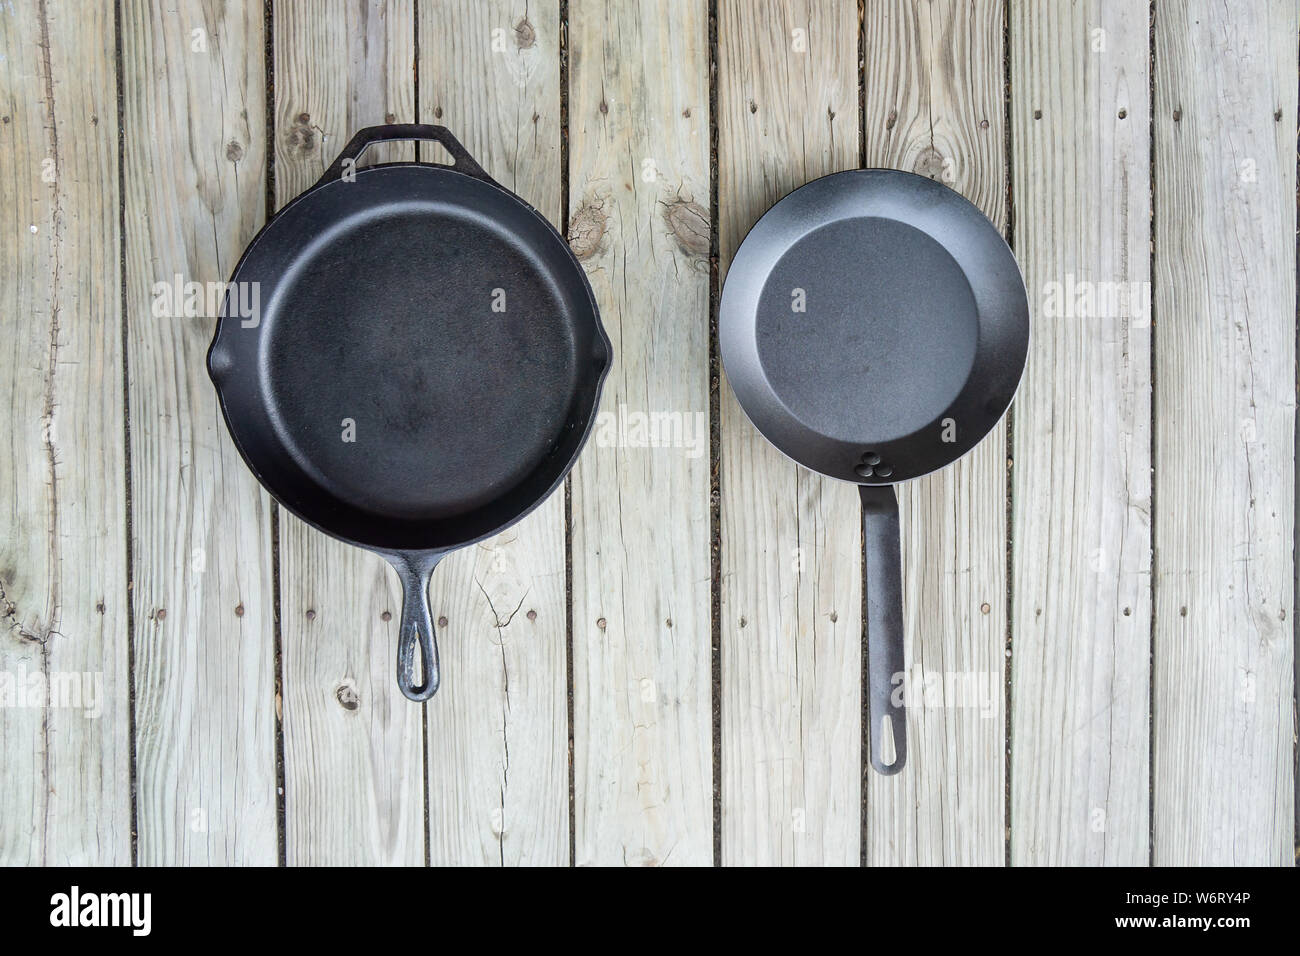 Traditional cast iron vs carbon steel versus teflon cooking options - blank empty room for text or copy space. Two cookware pieces - kitchen stove to Stock Photo